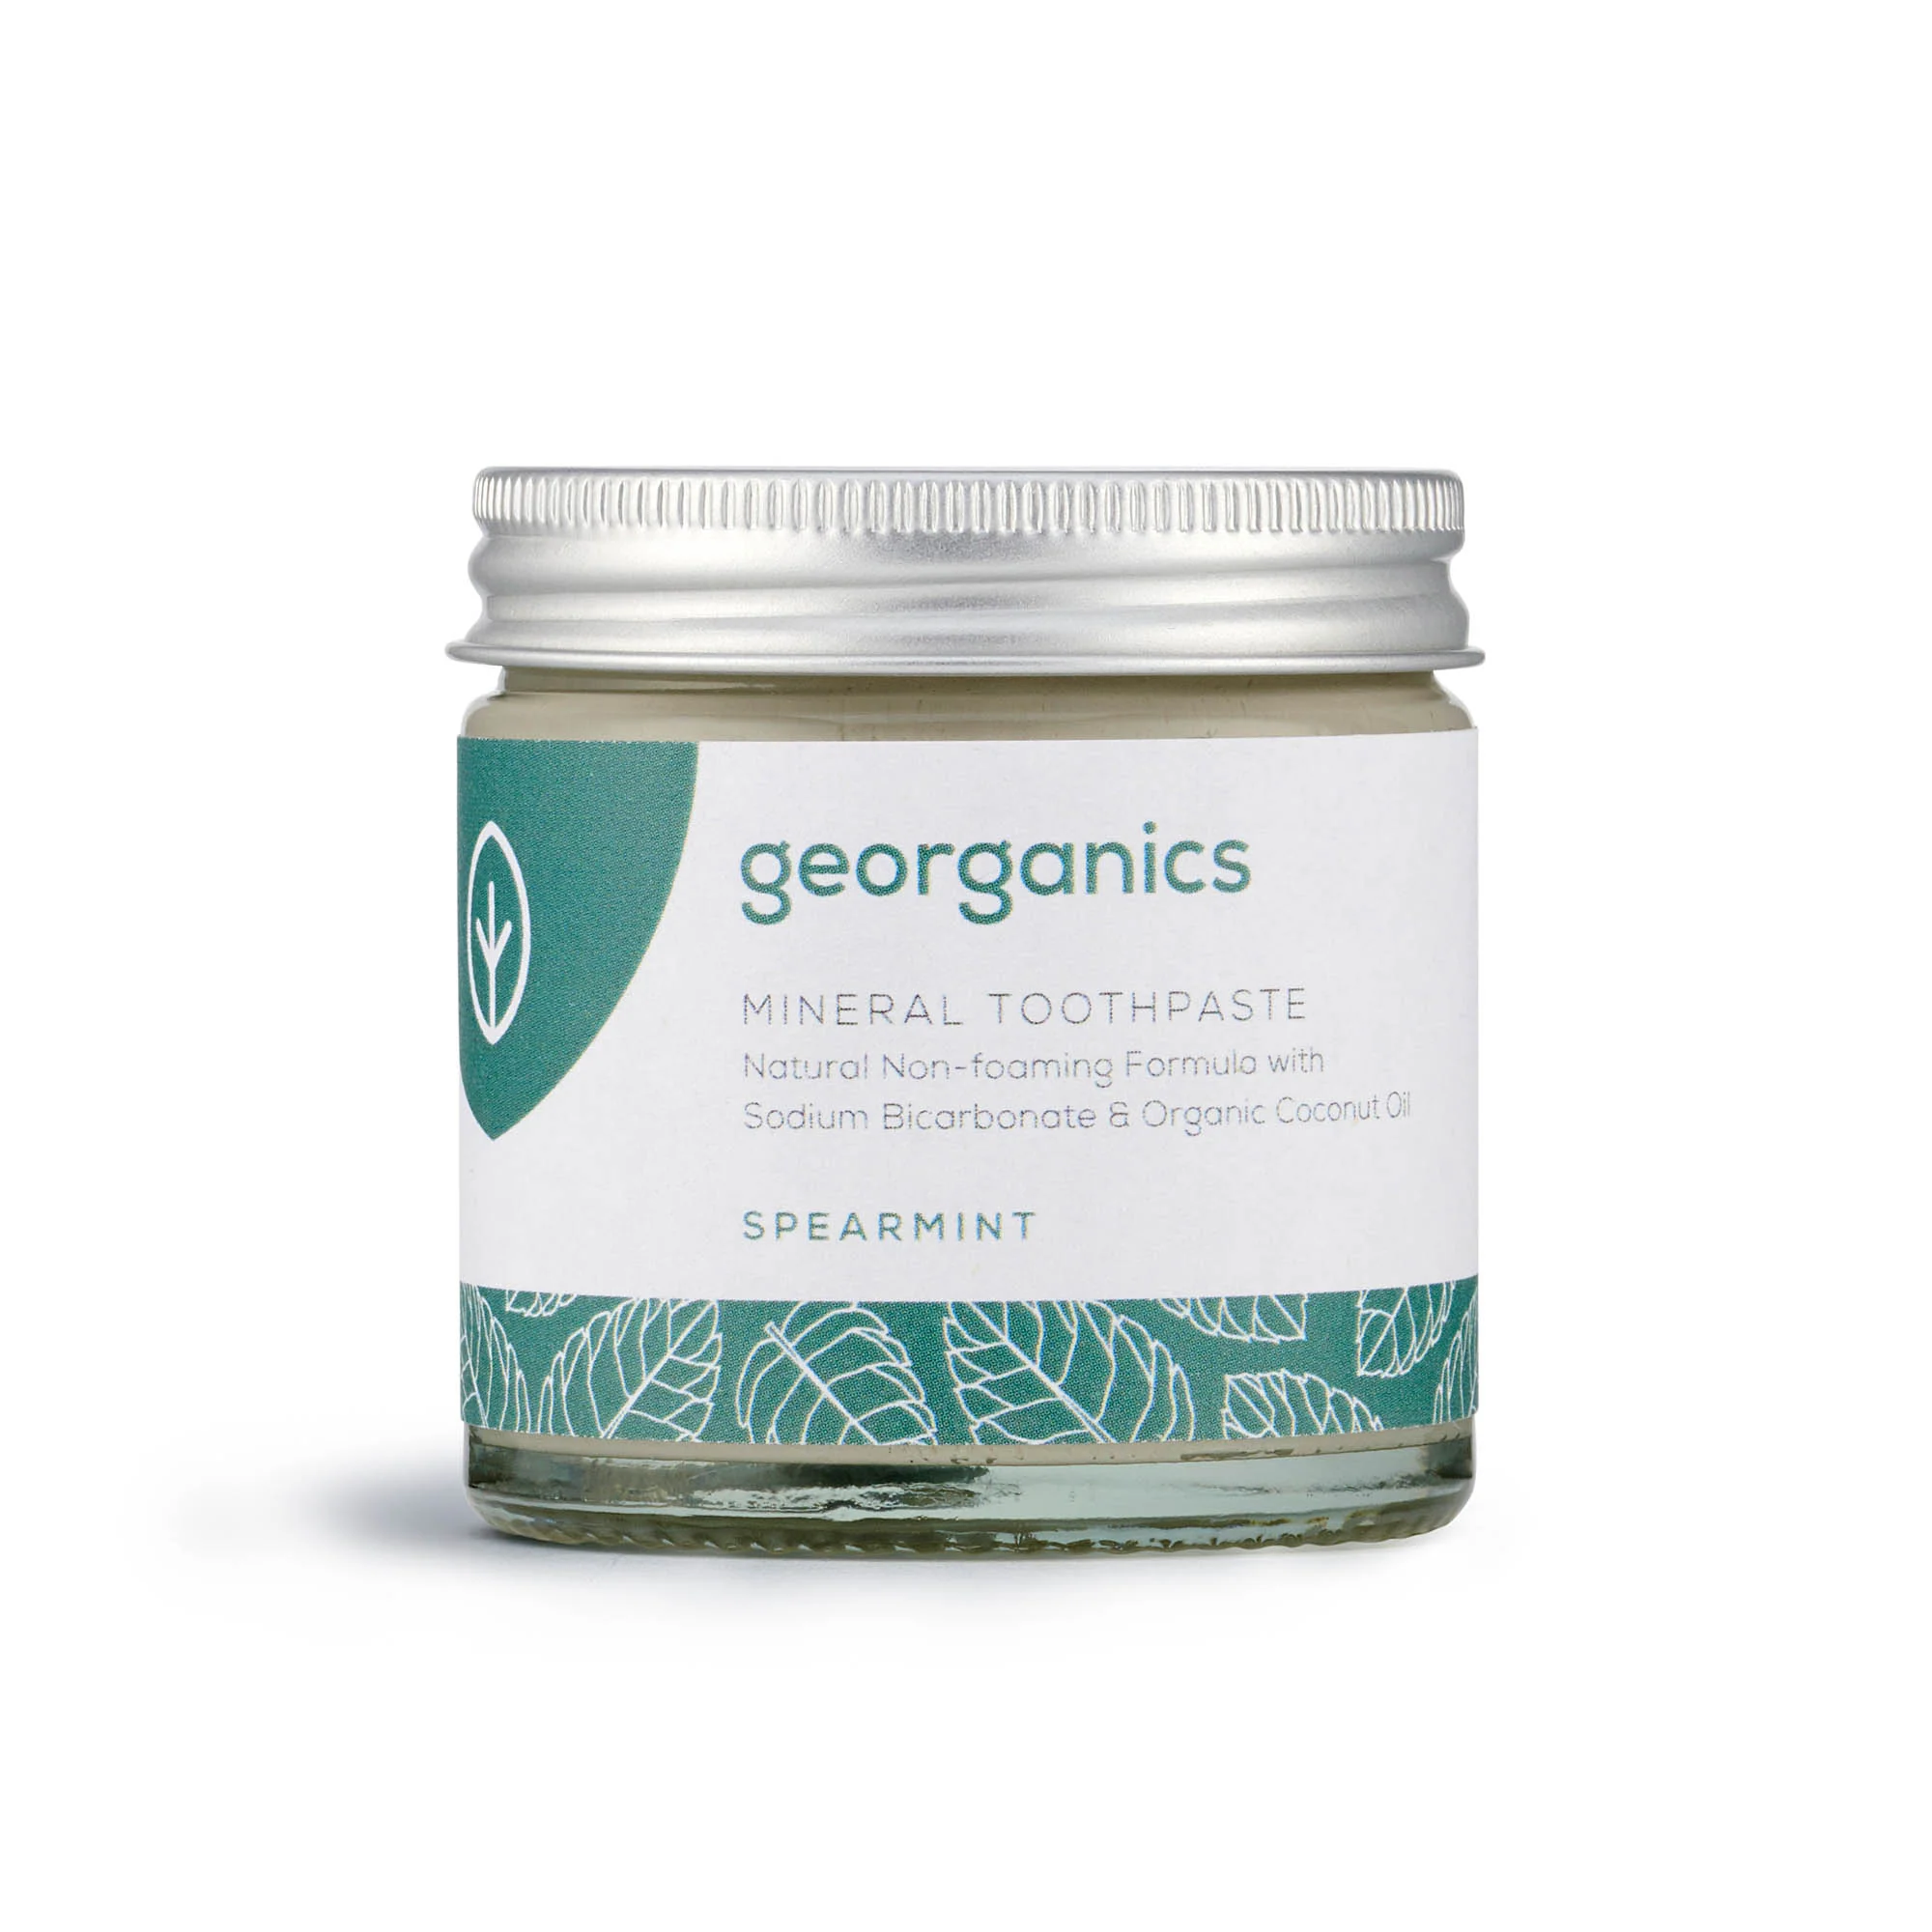 Mineral Toothpaste - Spearmint by Georganics. Embracing zero waste toothpaste